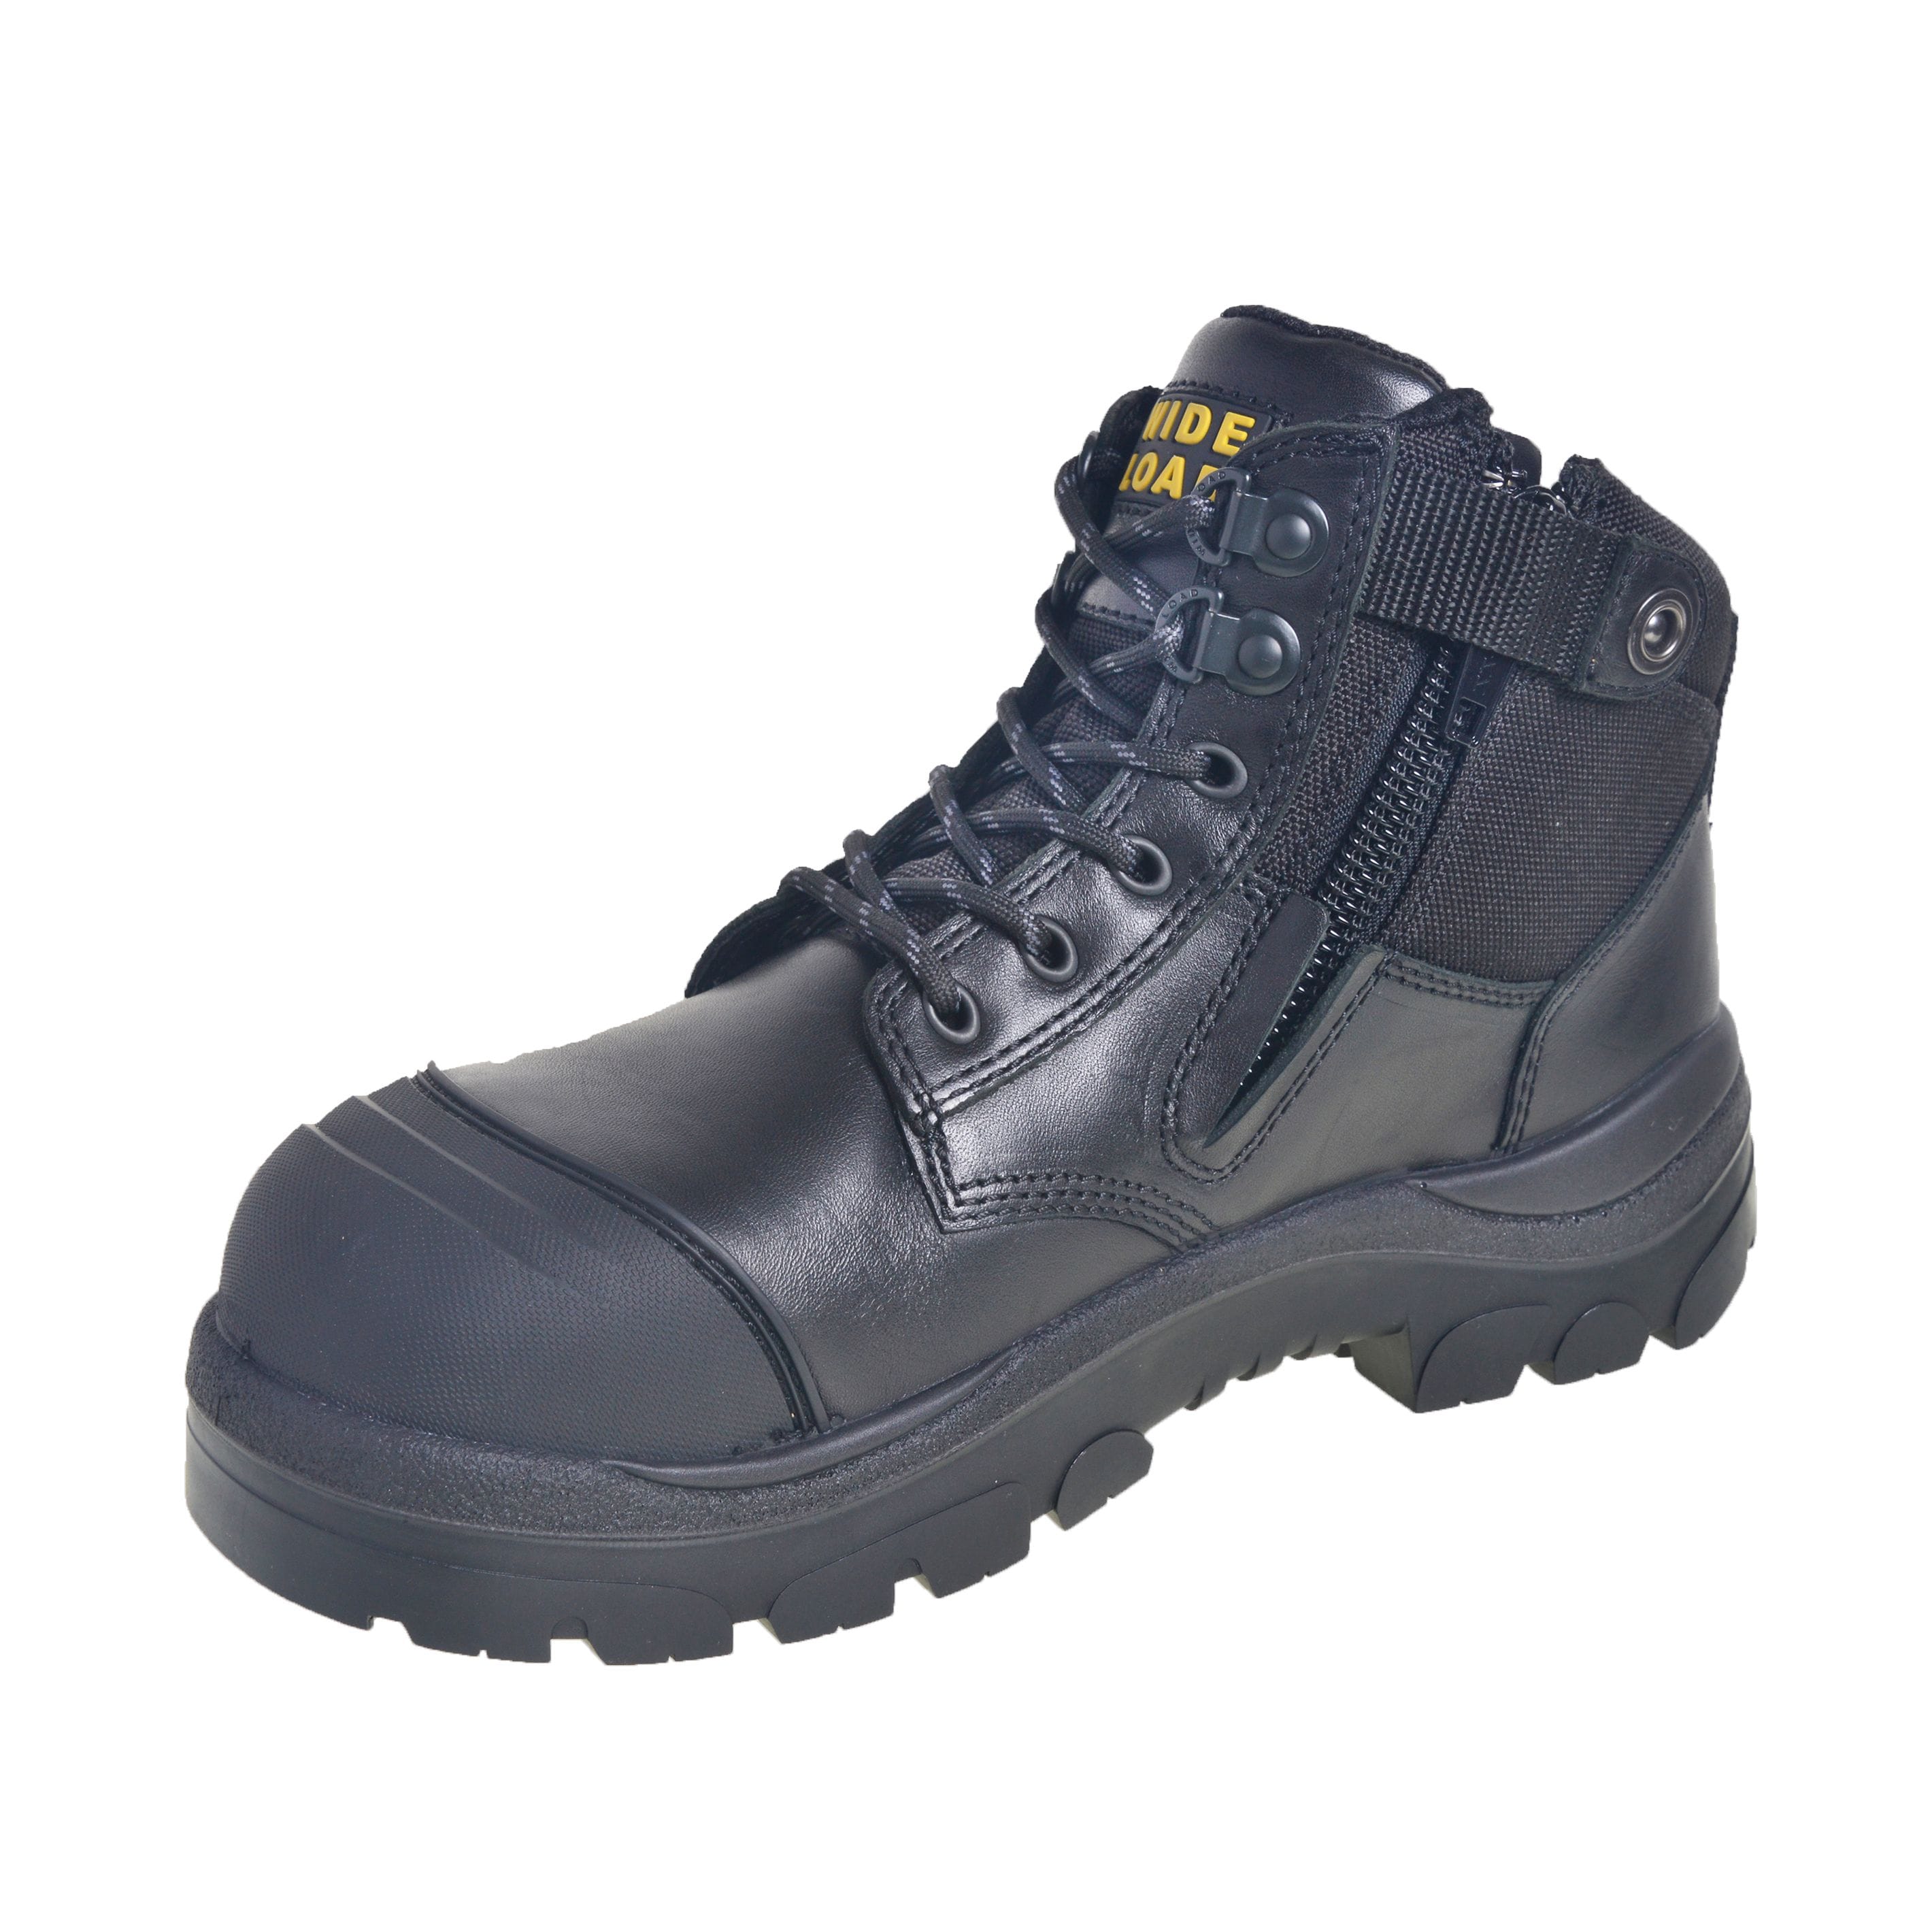 wide toe box safety shoes